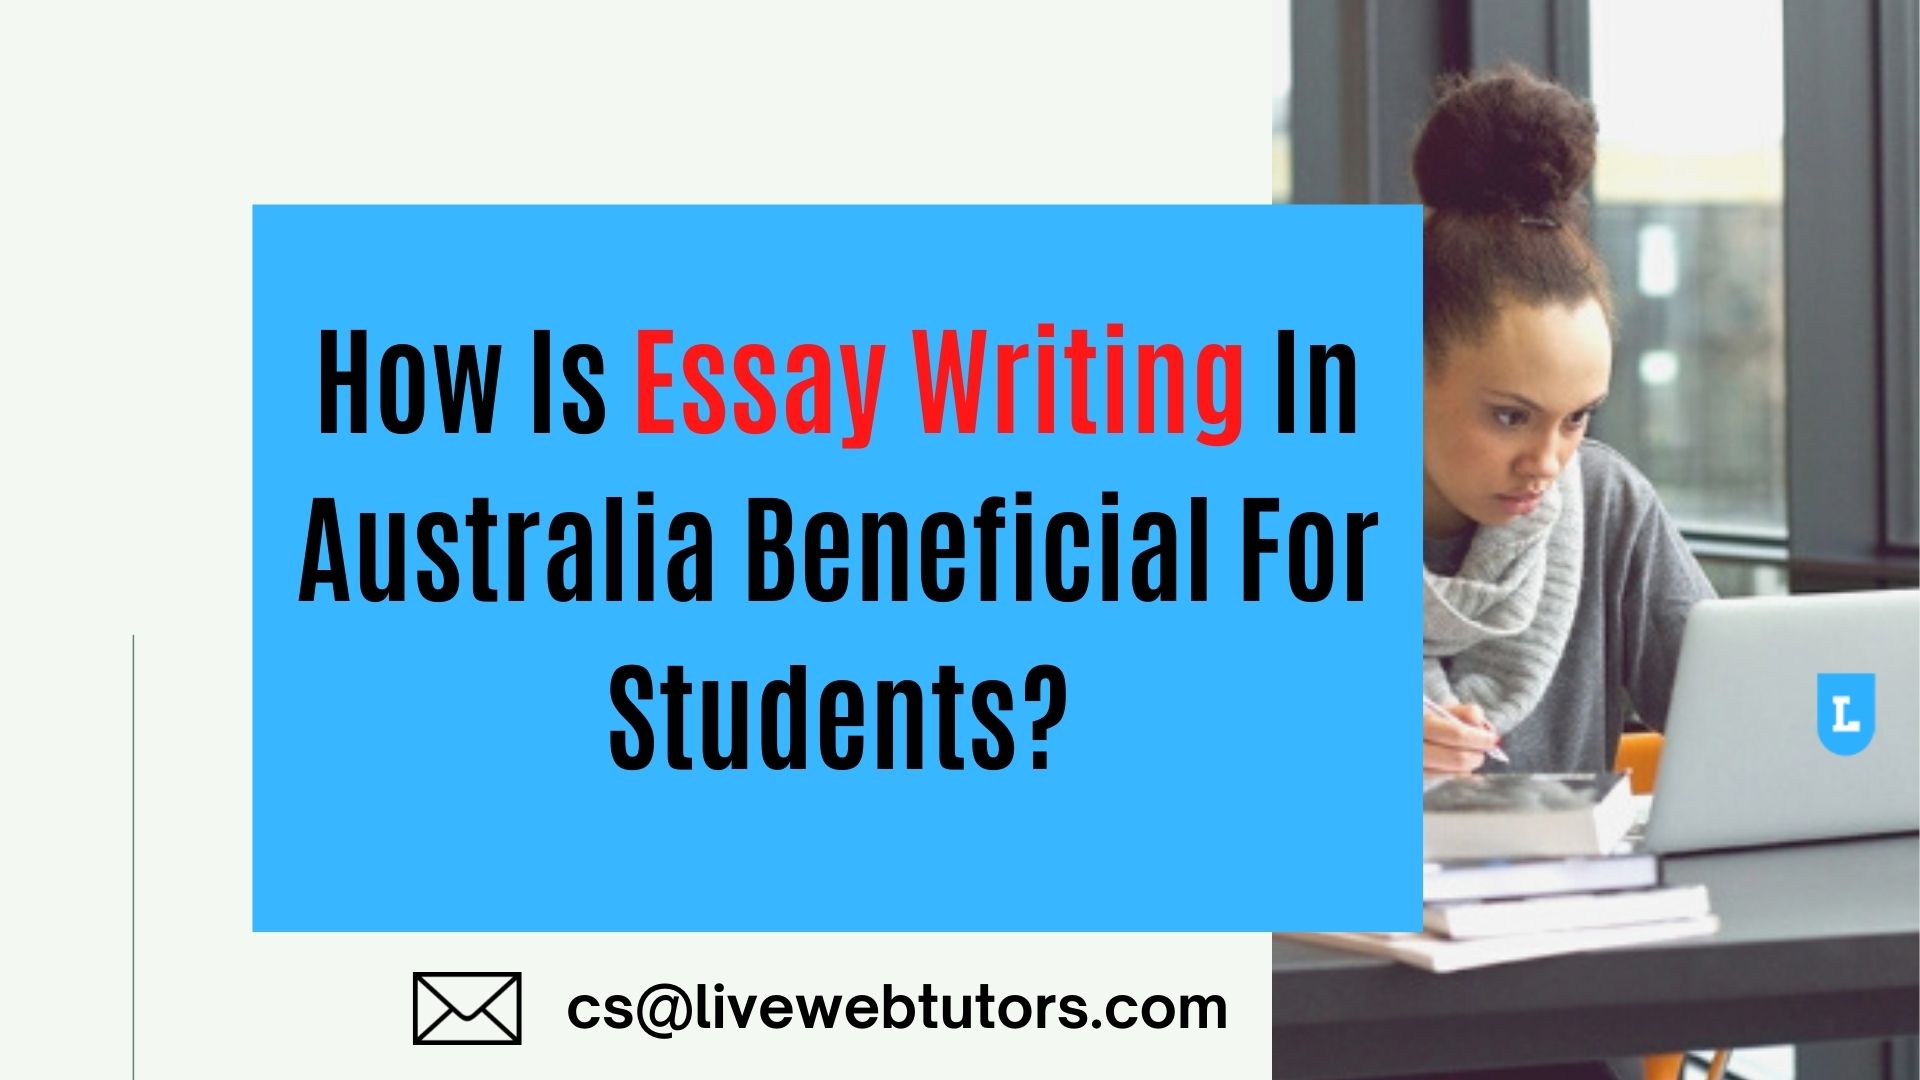 How Is Essay Writing in Australia Beneficial for Students?